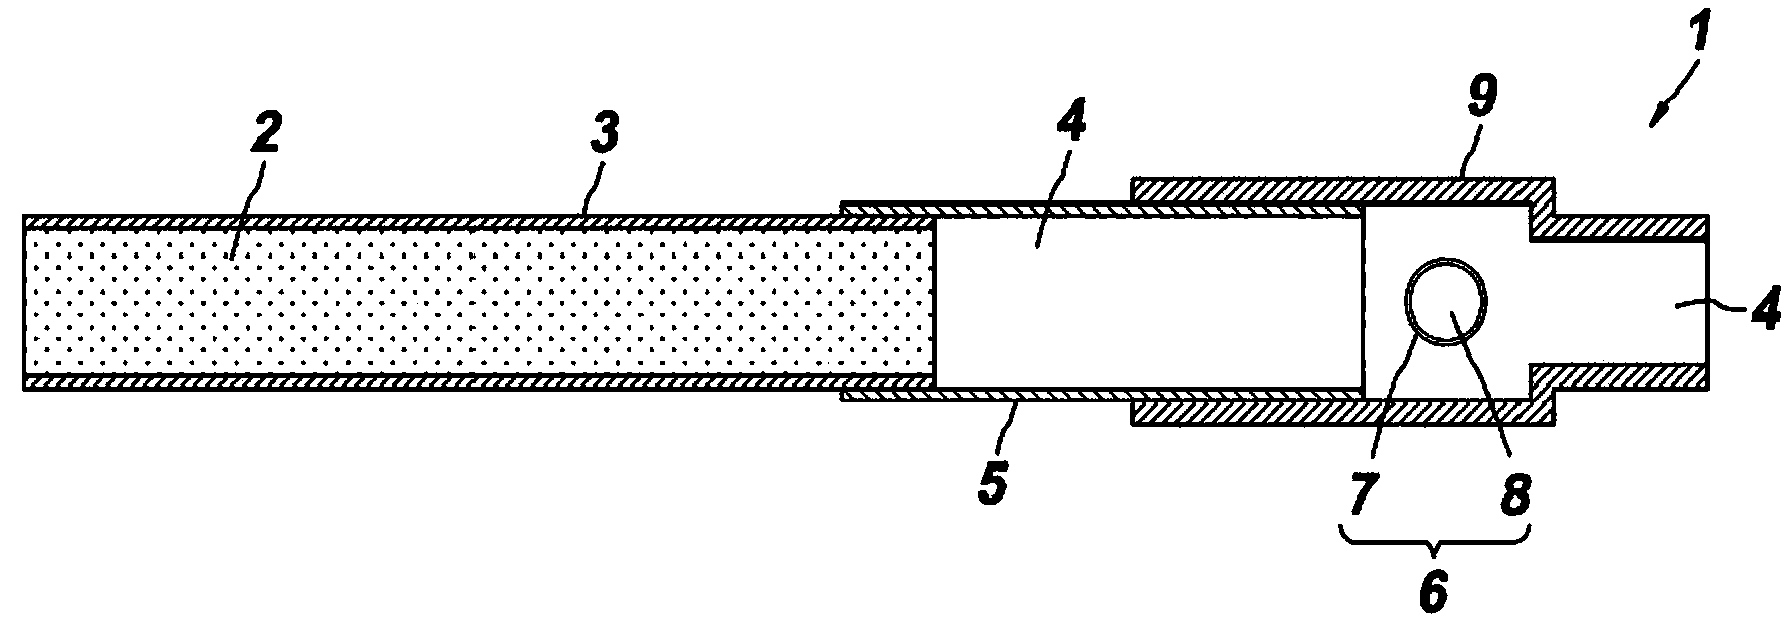 Filter containing built-in capsule, cigarette provided with filter and cigarette substitute provide with filter